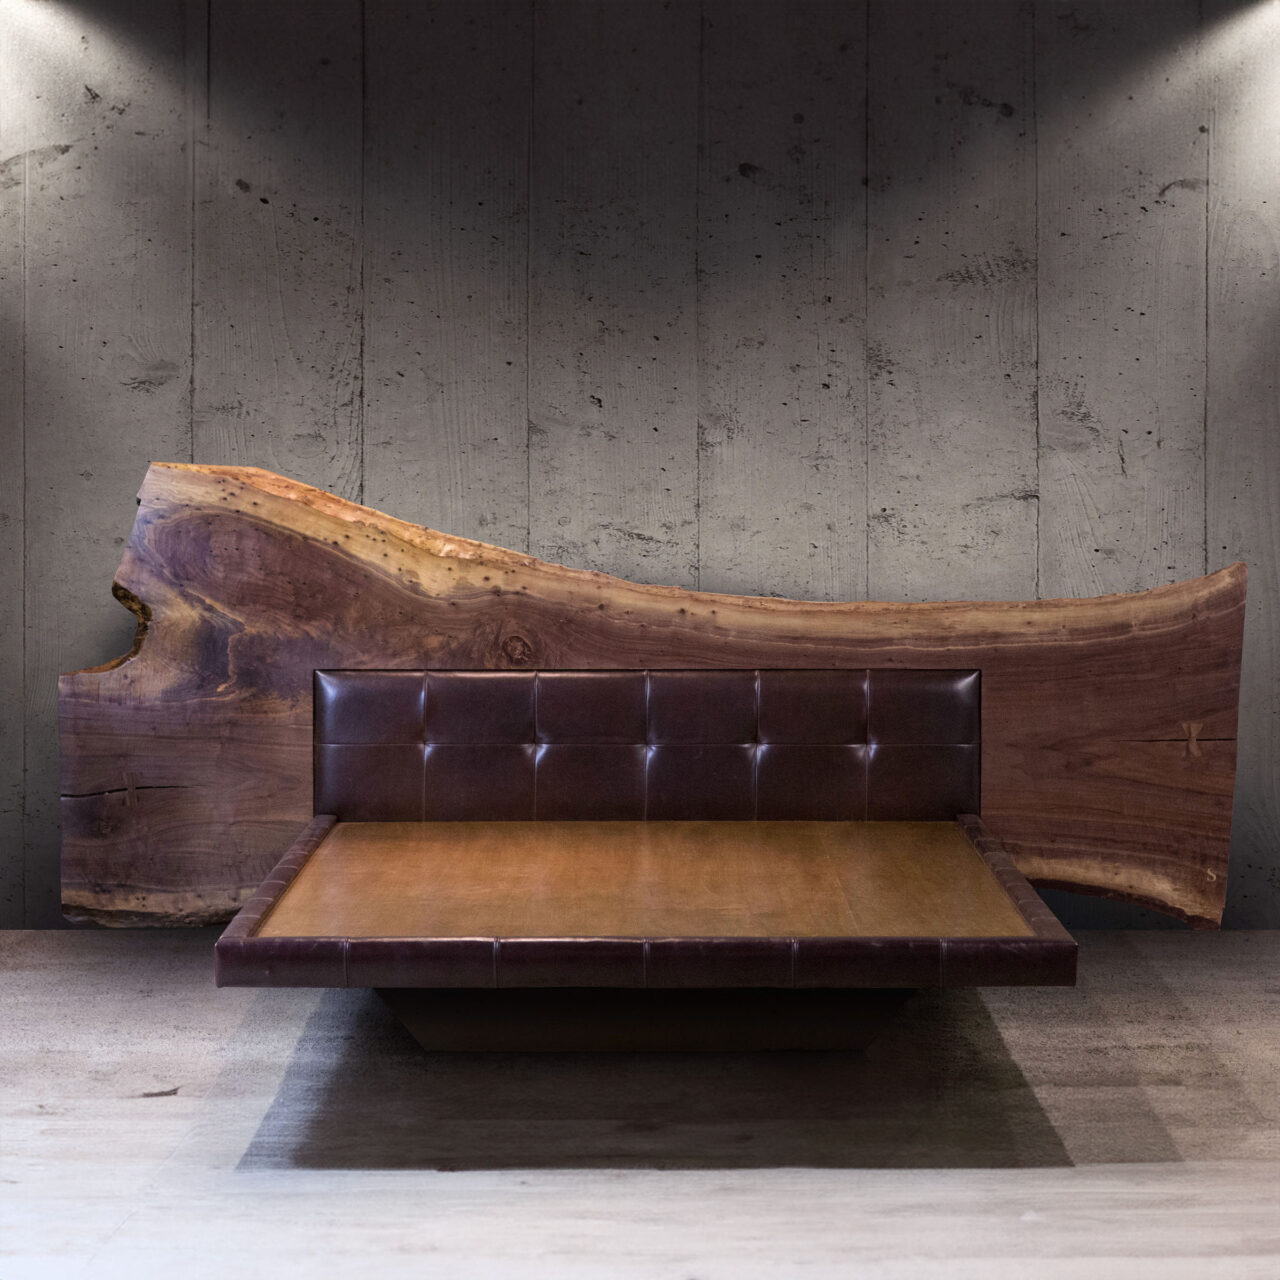 SENTIENT Furniture's luxurious live-edge bed with a smooth walnut backrest seamlessly transitioning from raw edge to polished, juxtaposed against a textured concrete wall.